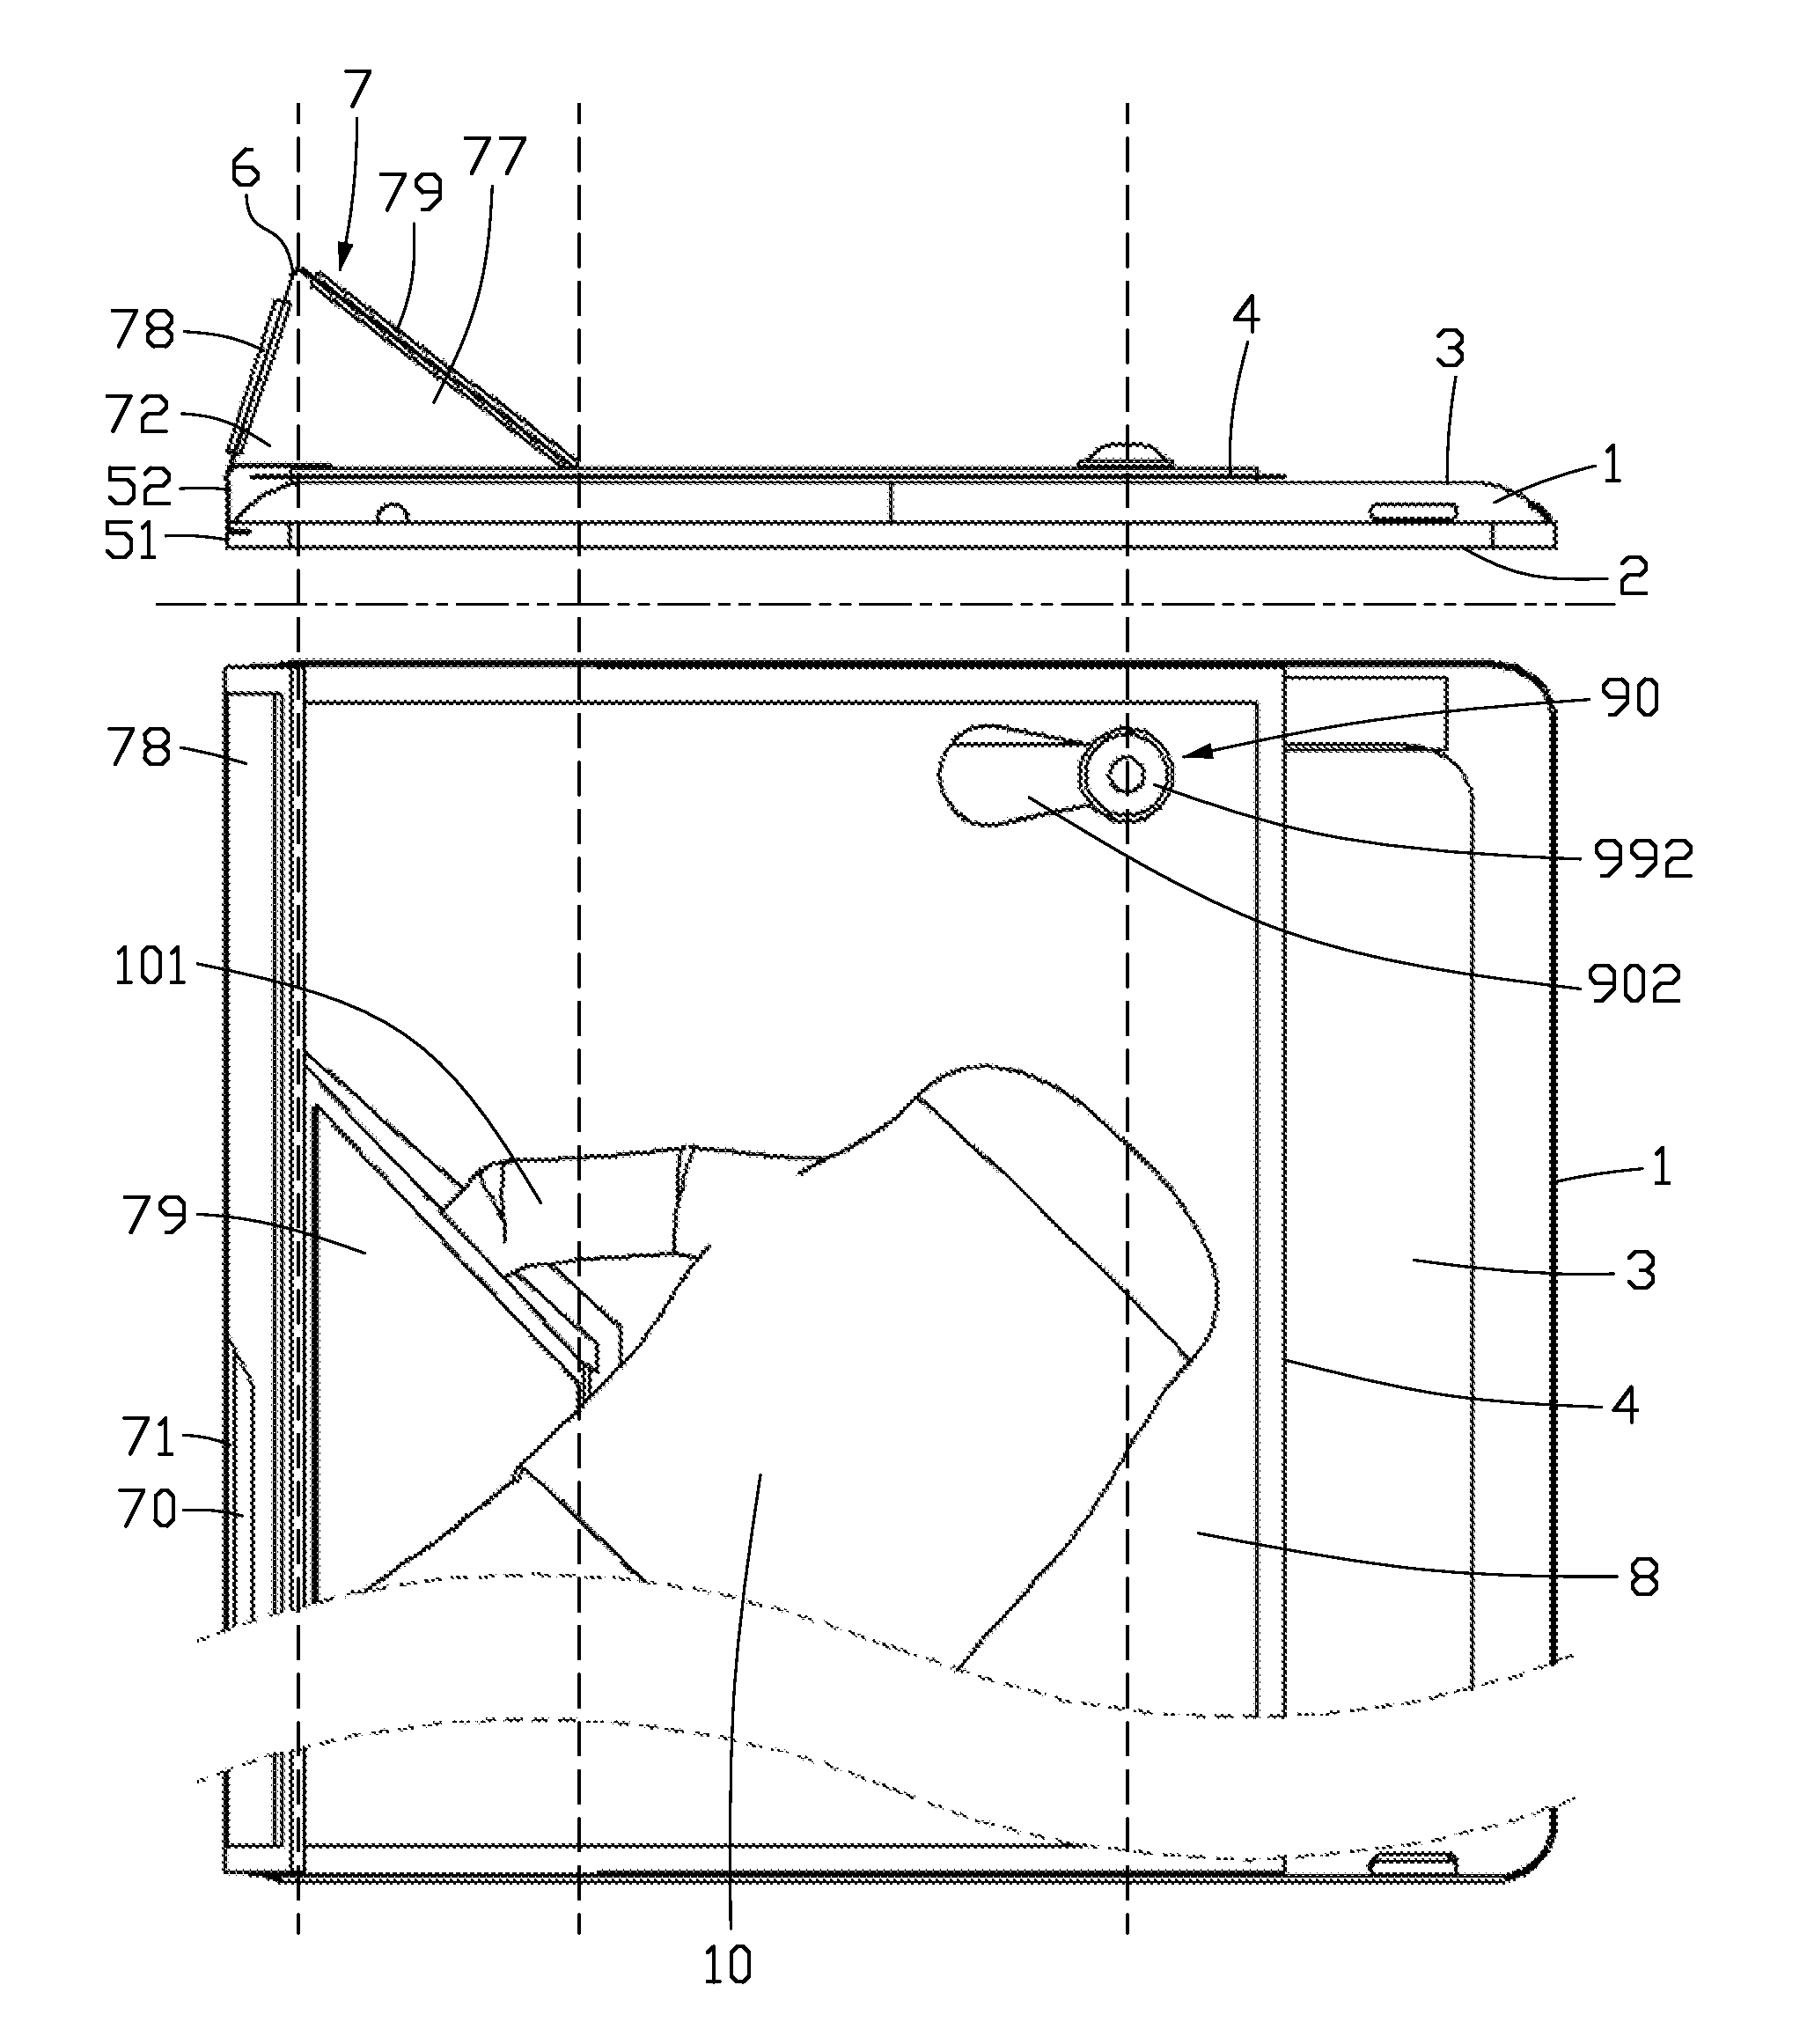 Cover with handle structure for facilitating hold a device and method of using the same